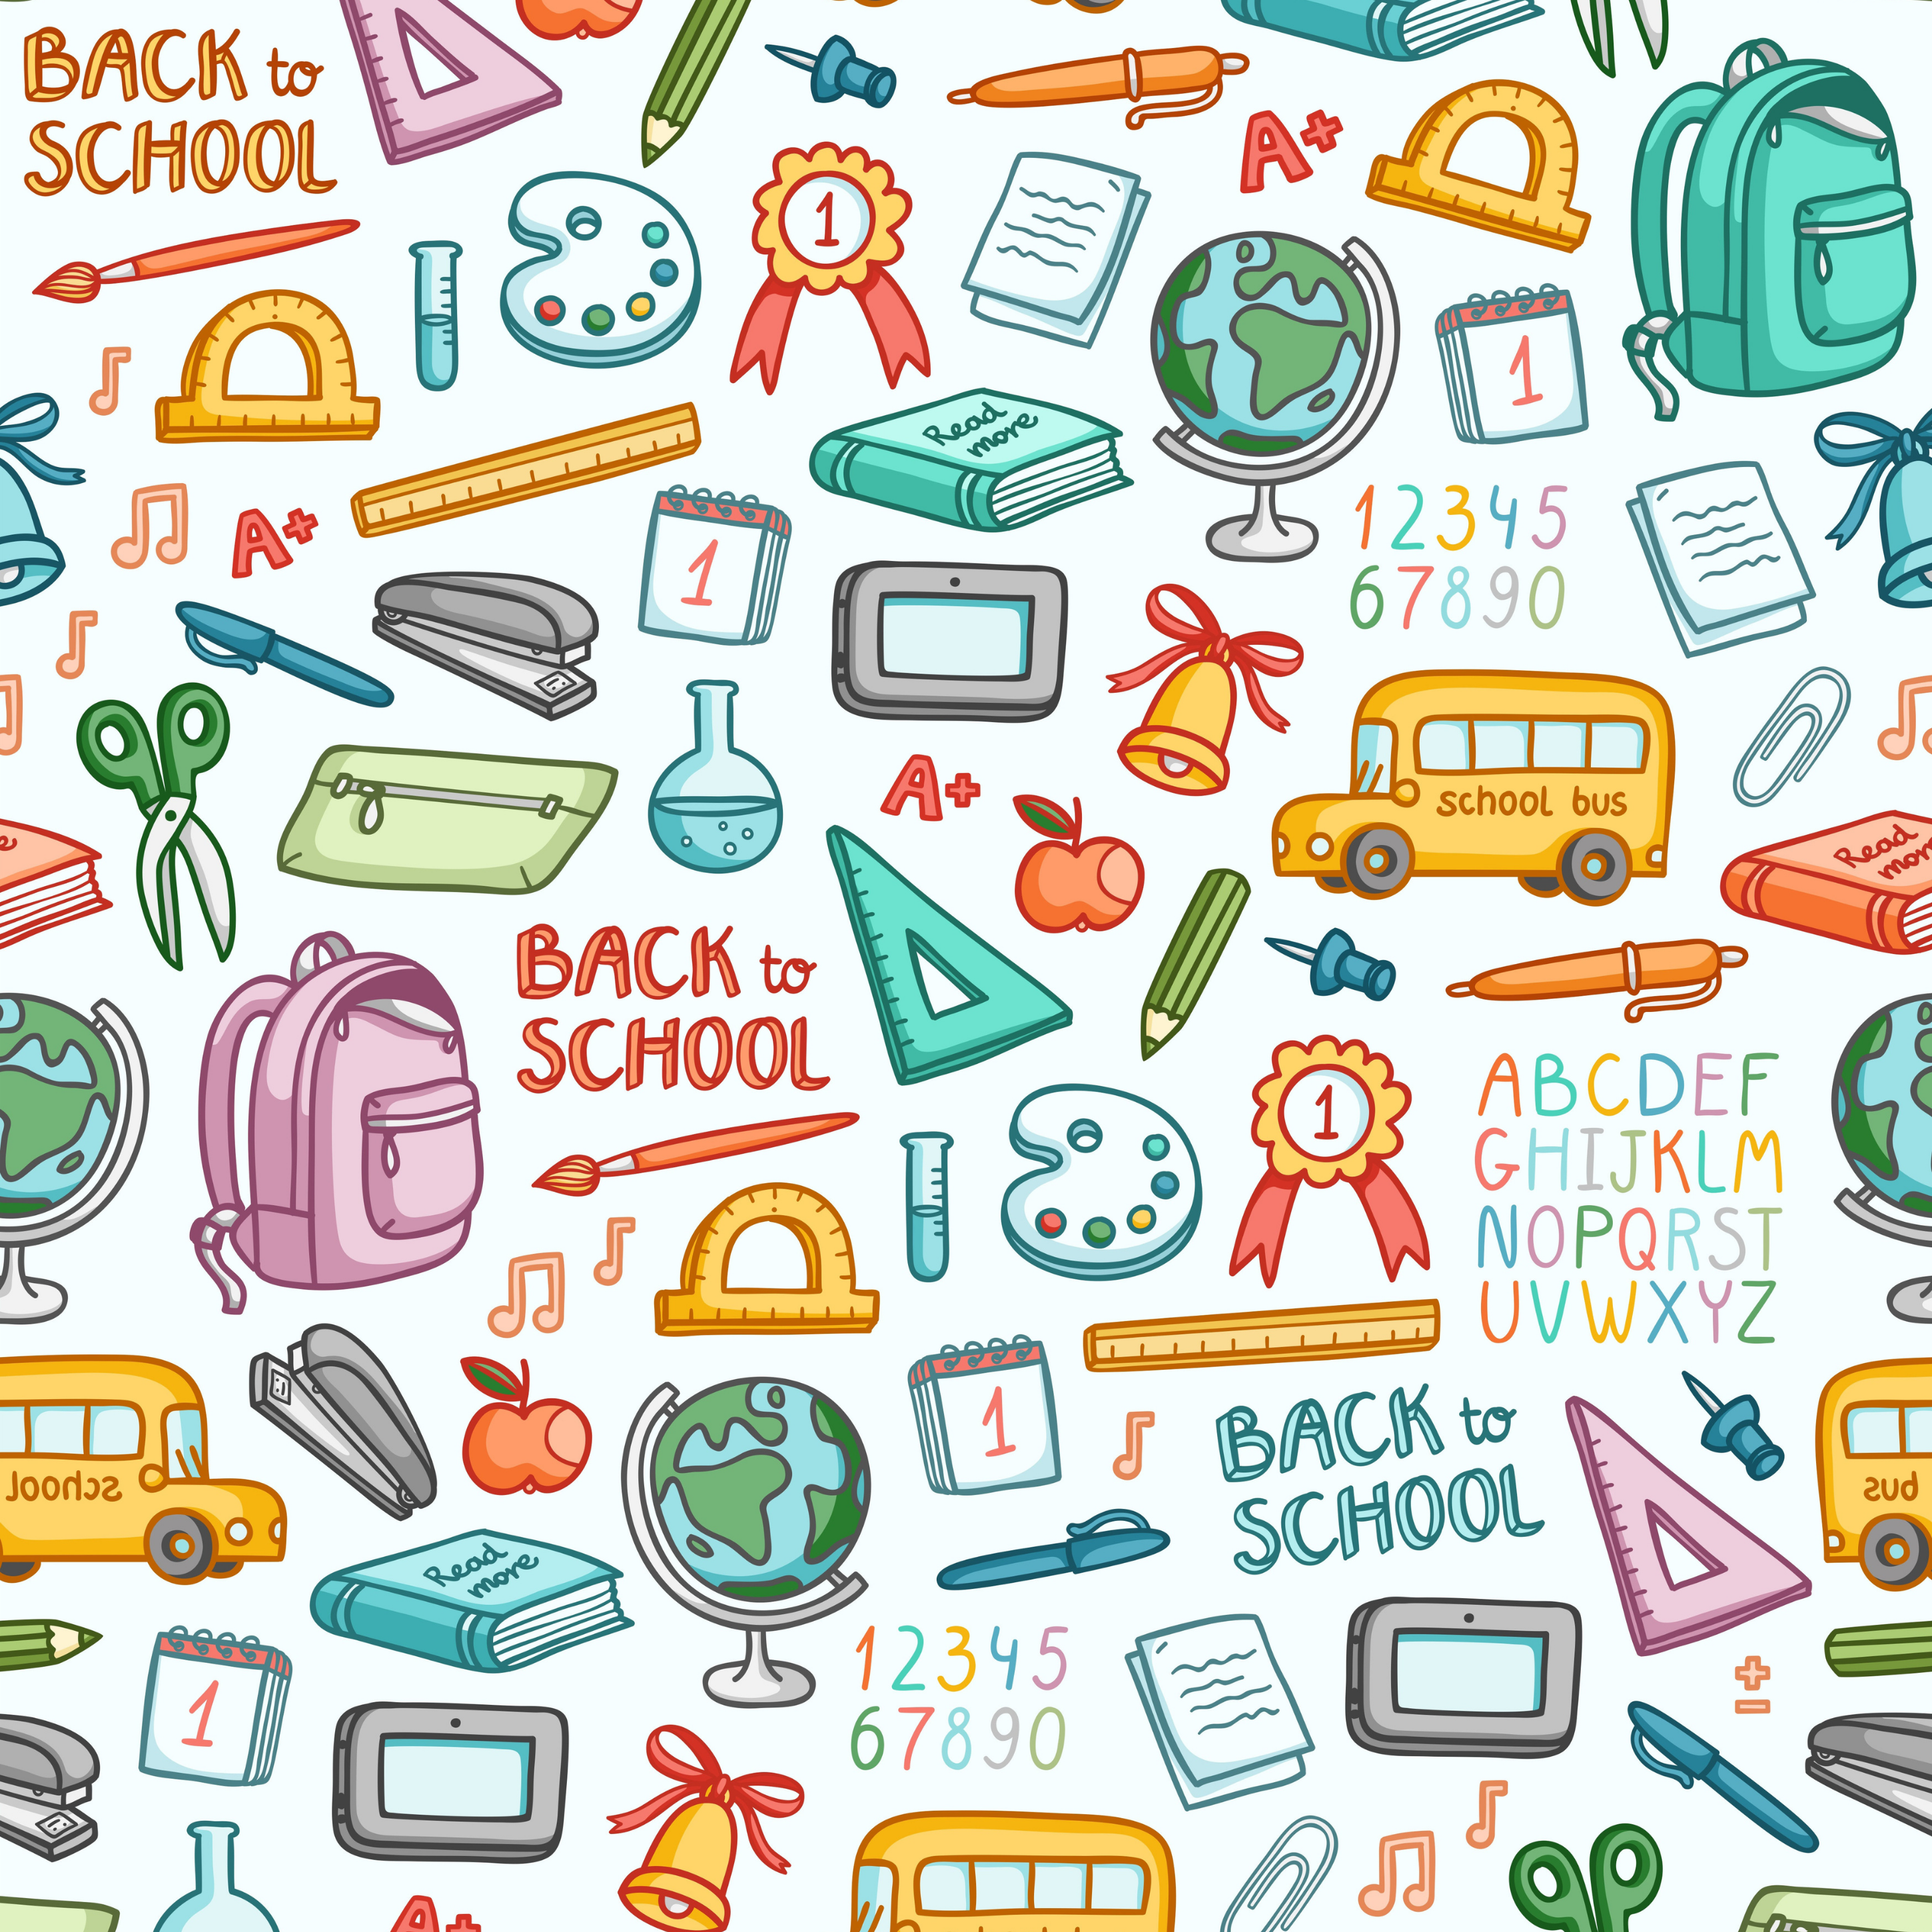 Back to School 1- Heat Transfer Vinyl and Carrier Sheet